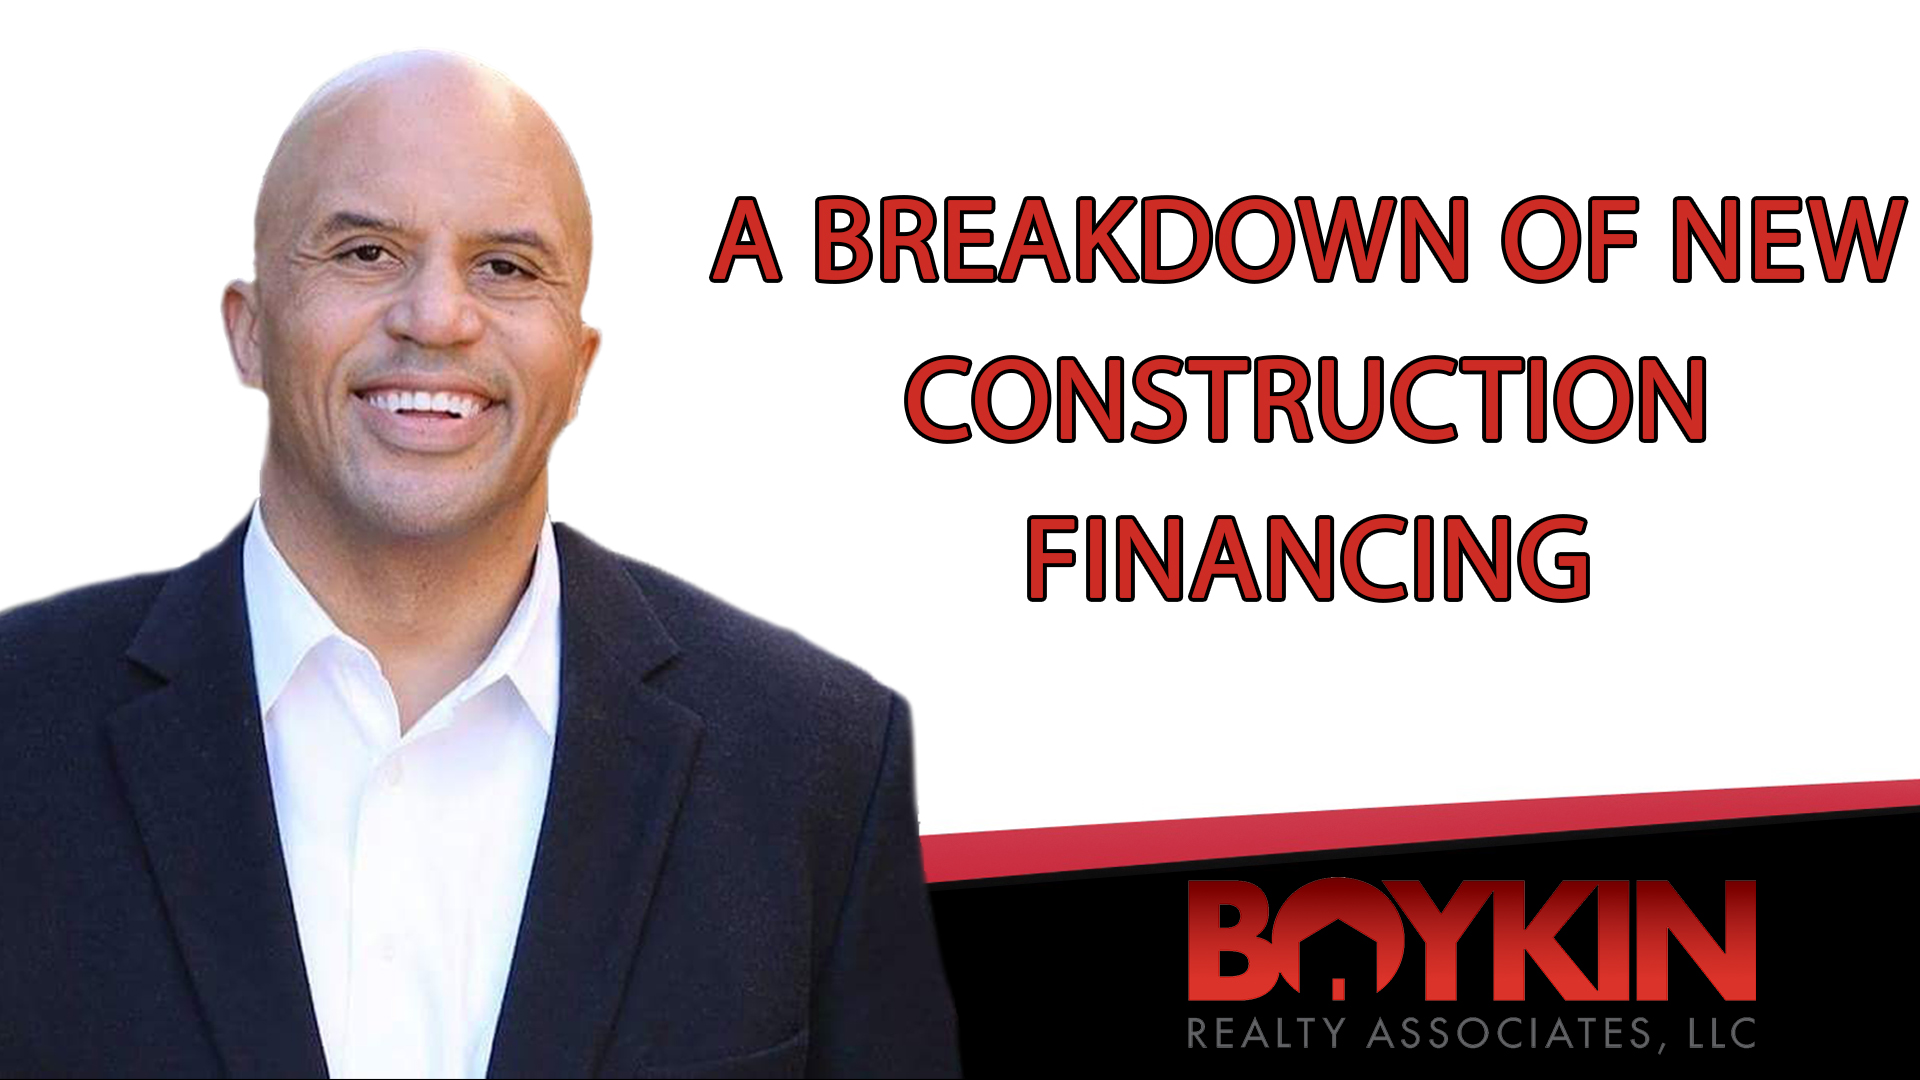 What Do You Need to Know About New Construction Financing?